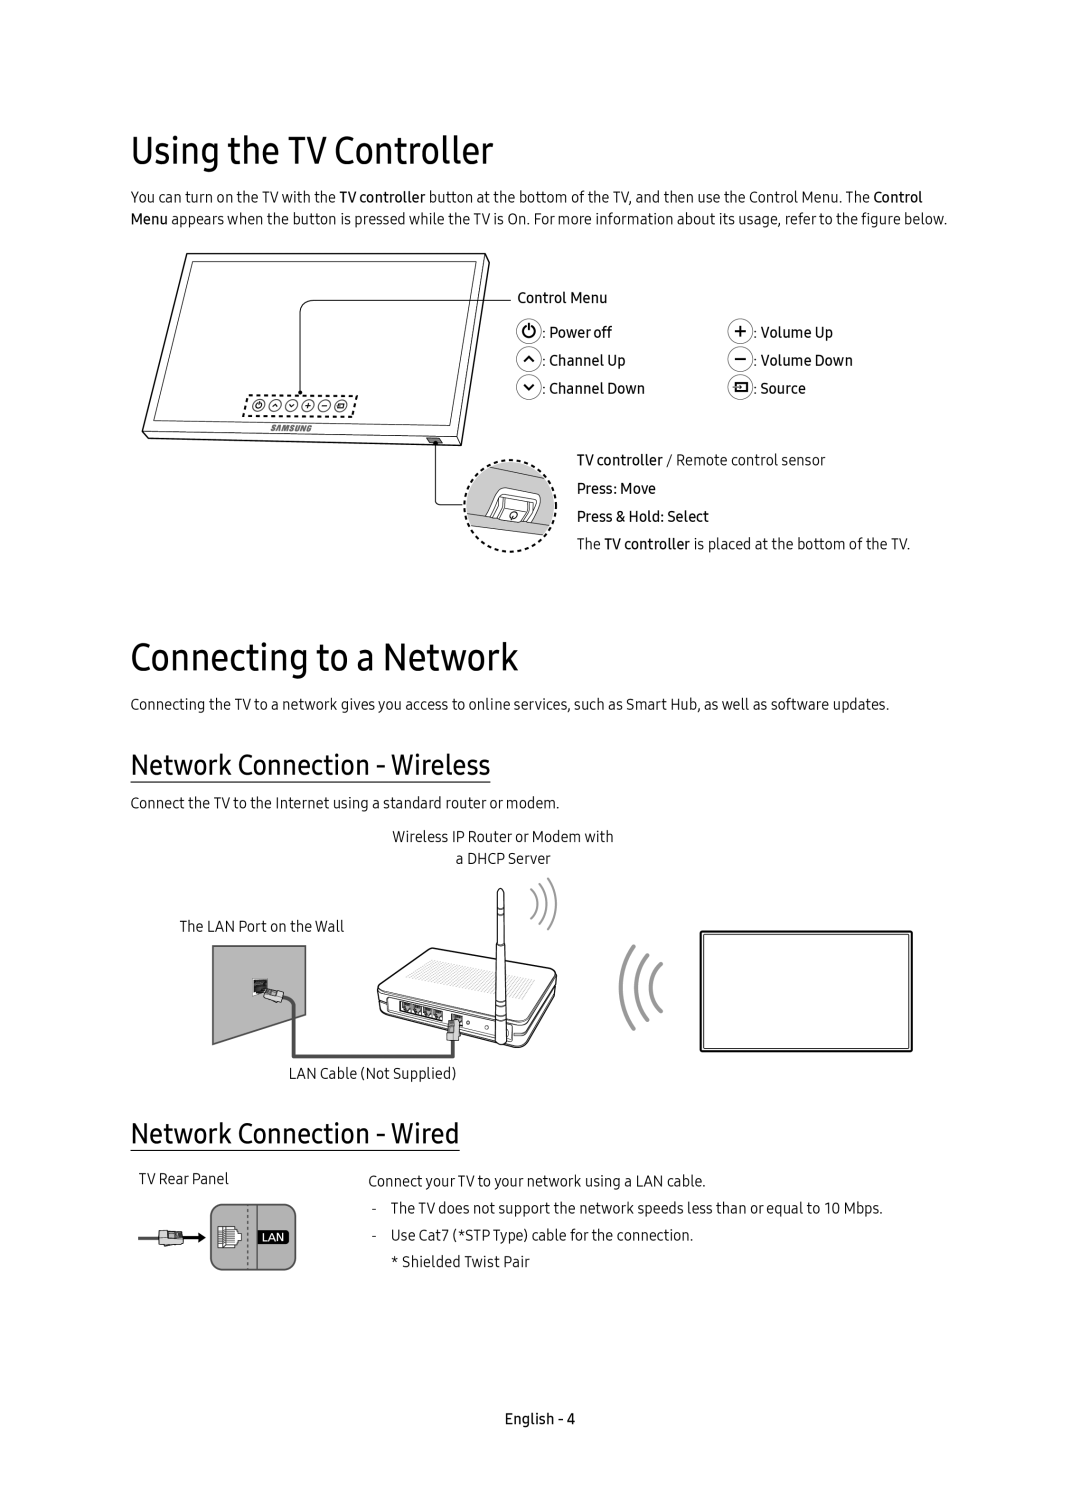 Samsung UE65KU6500UXZT manual Using the TV Controller, Connecting to a Network, Network Connection - Wireless, Control Menu 